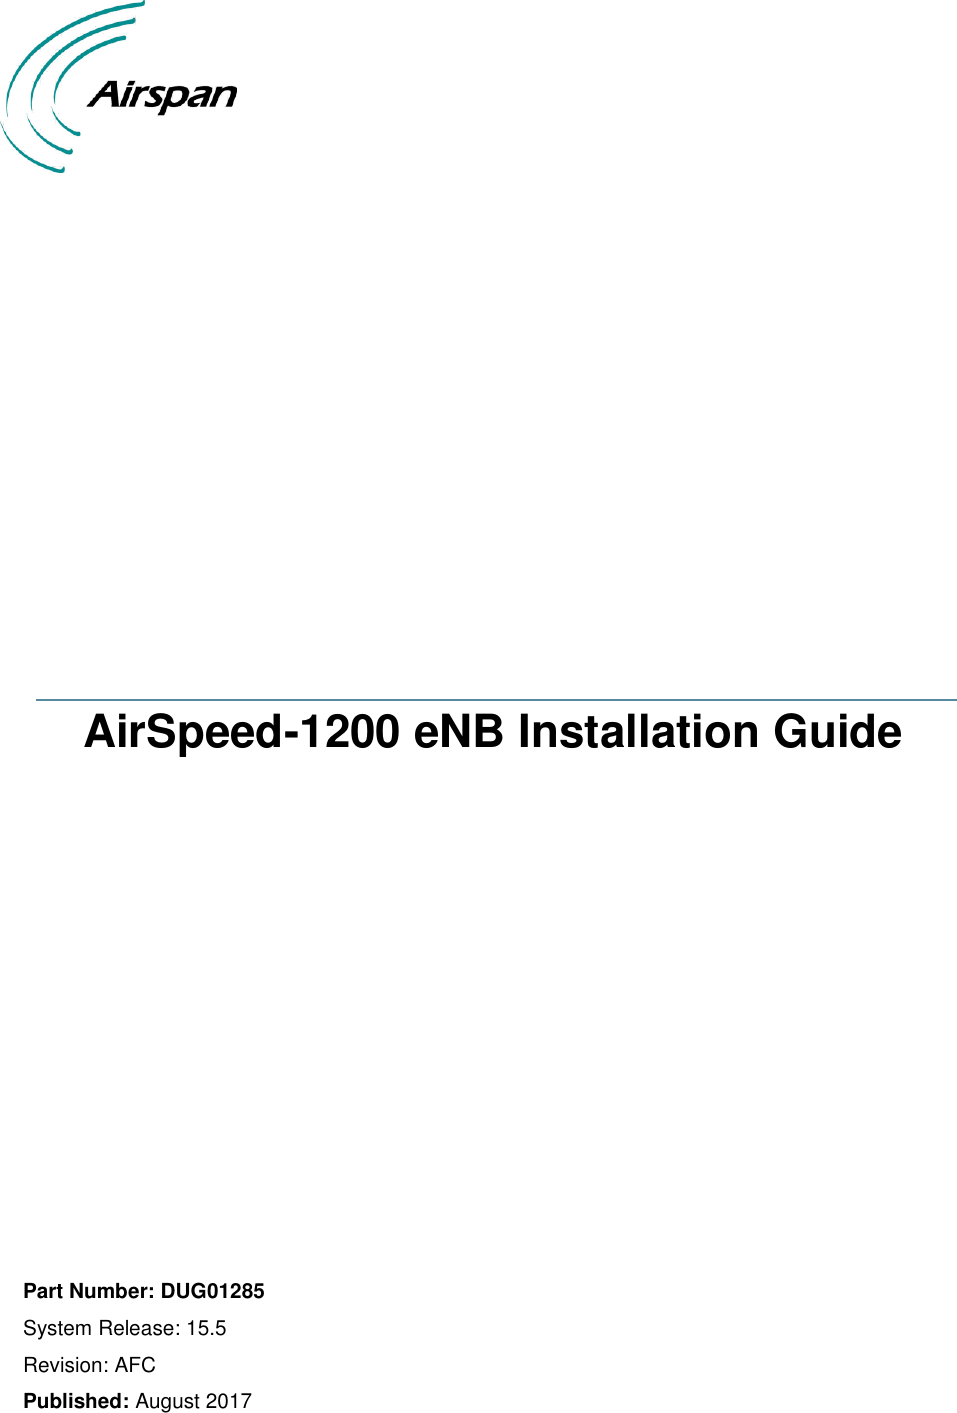                       AirSpeed-1200 eNB Installation Guide                Part Number: DUG01285 System Release: 15.5 Revision: AFC Published: August 2017  